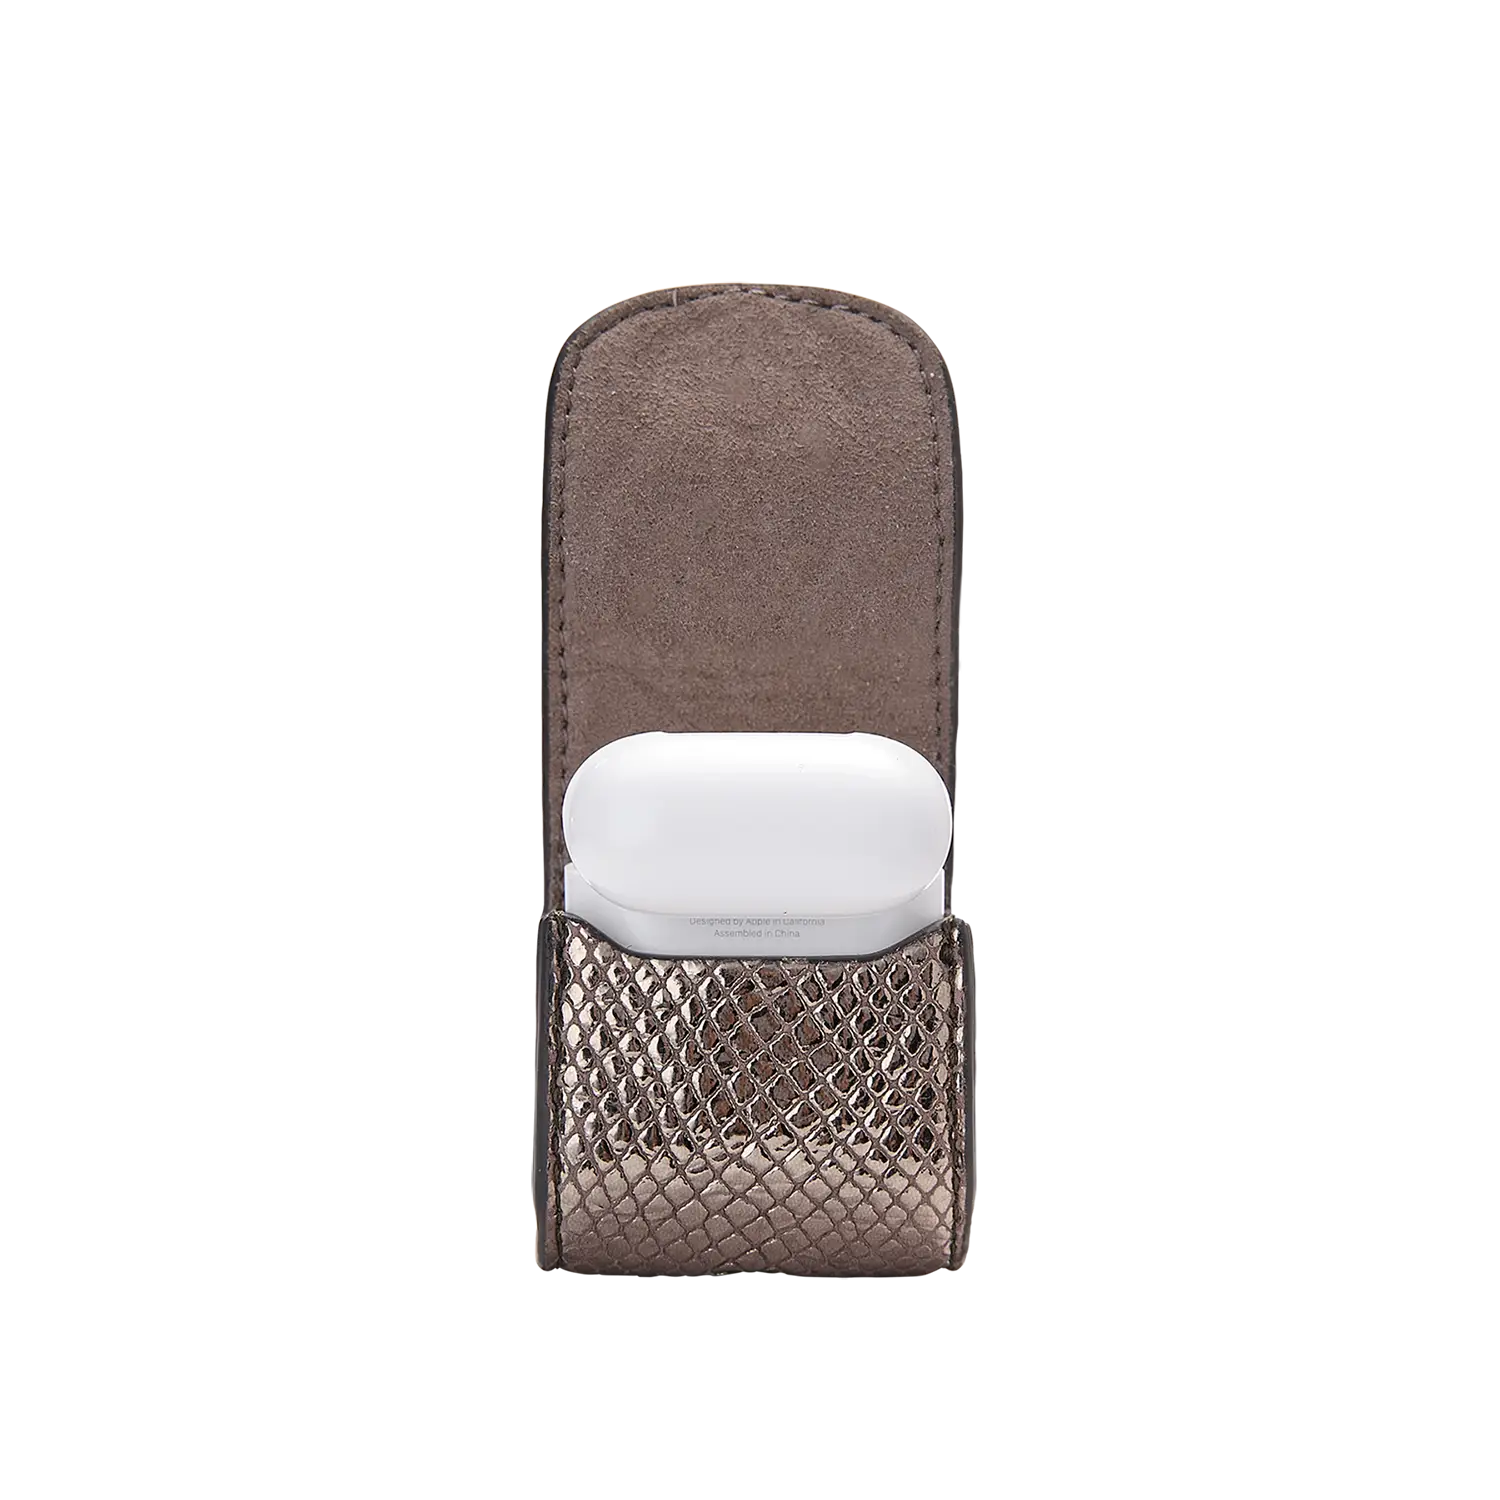 Airpods Bag - Keep it Funky - bronze